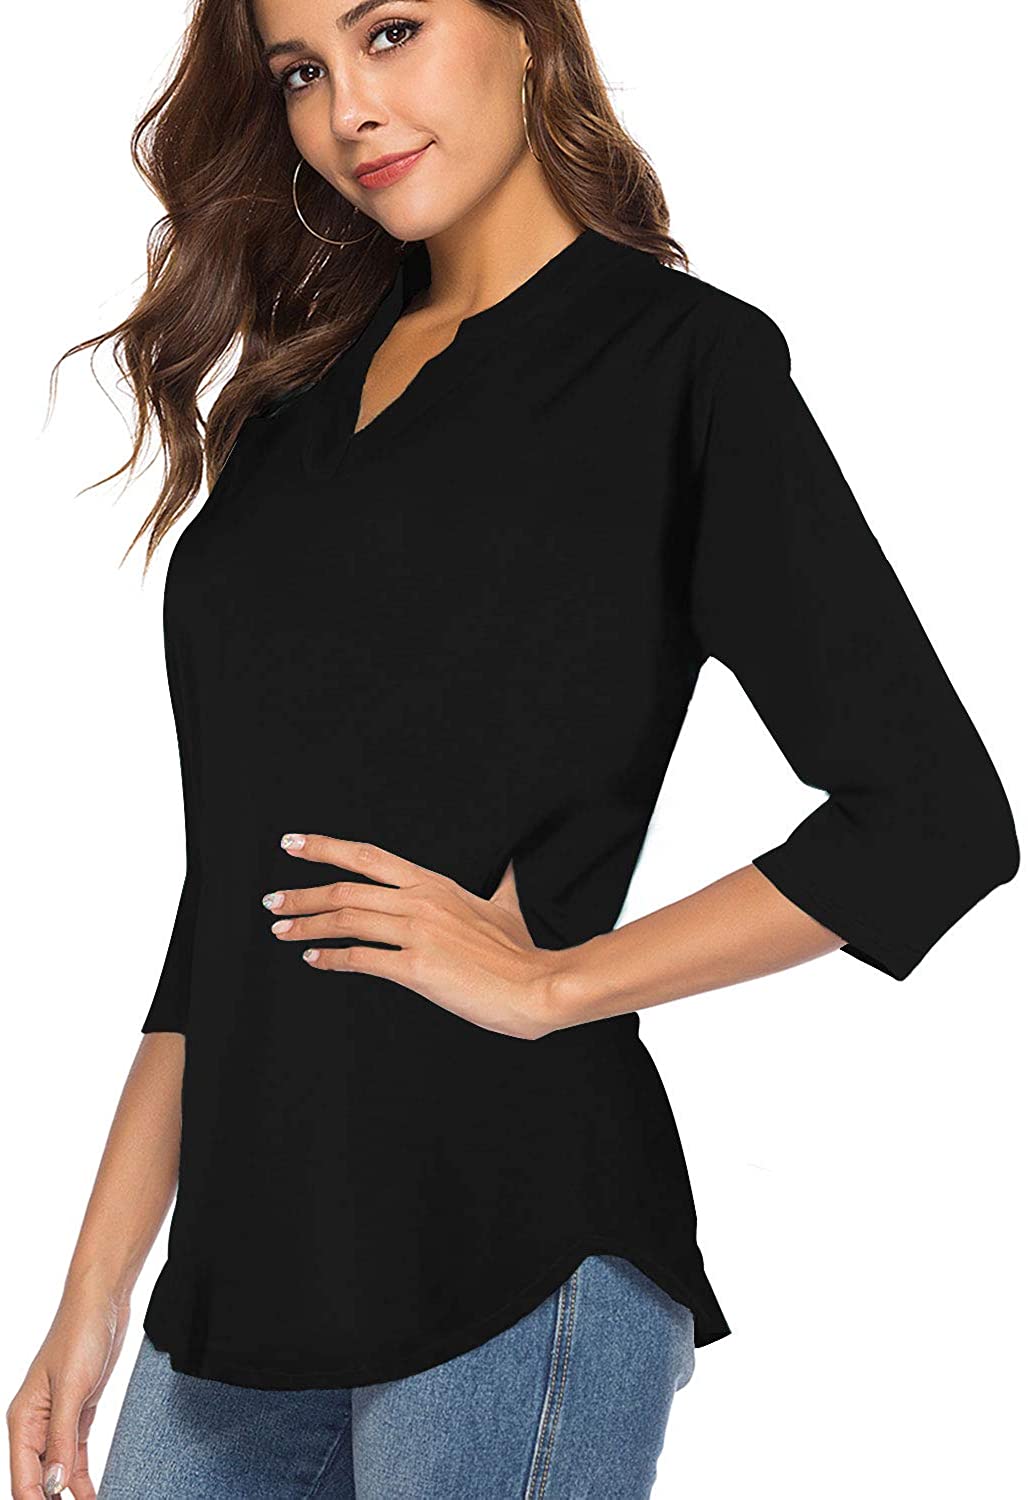 CEASIKERY Women's 3/4 Sleeve V Neck Tops Casual Tunic Blouse Loose ...